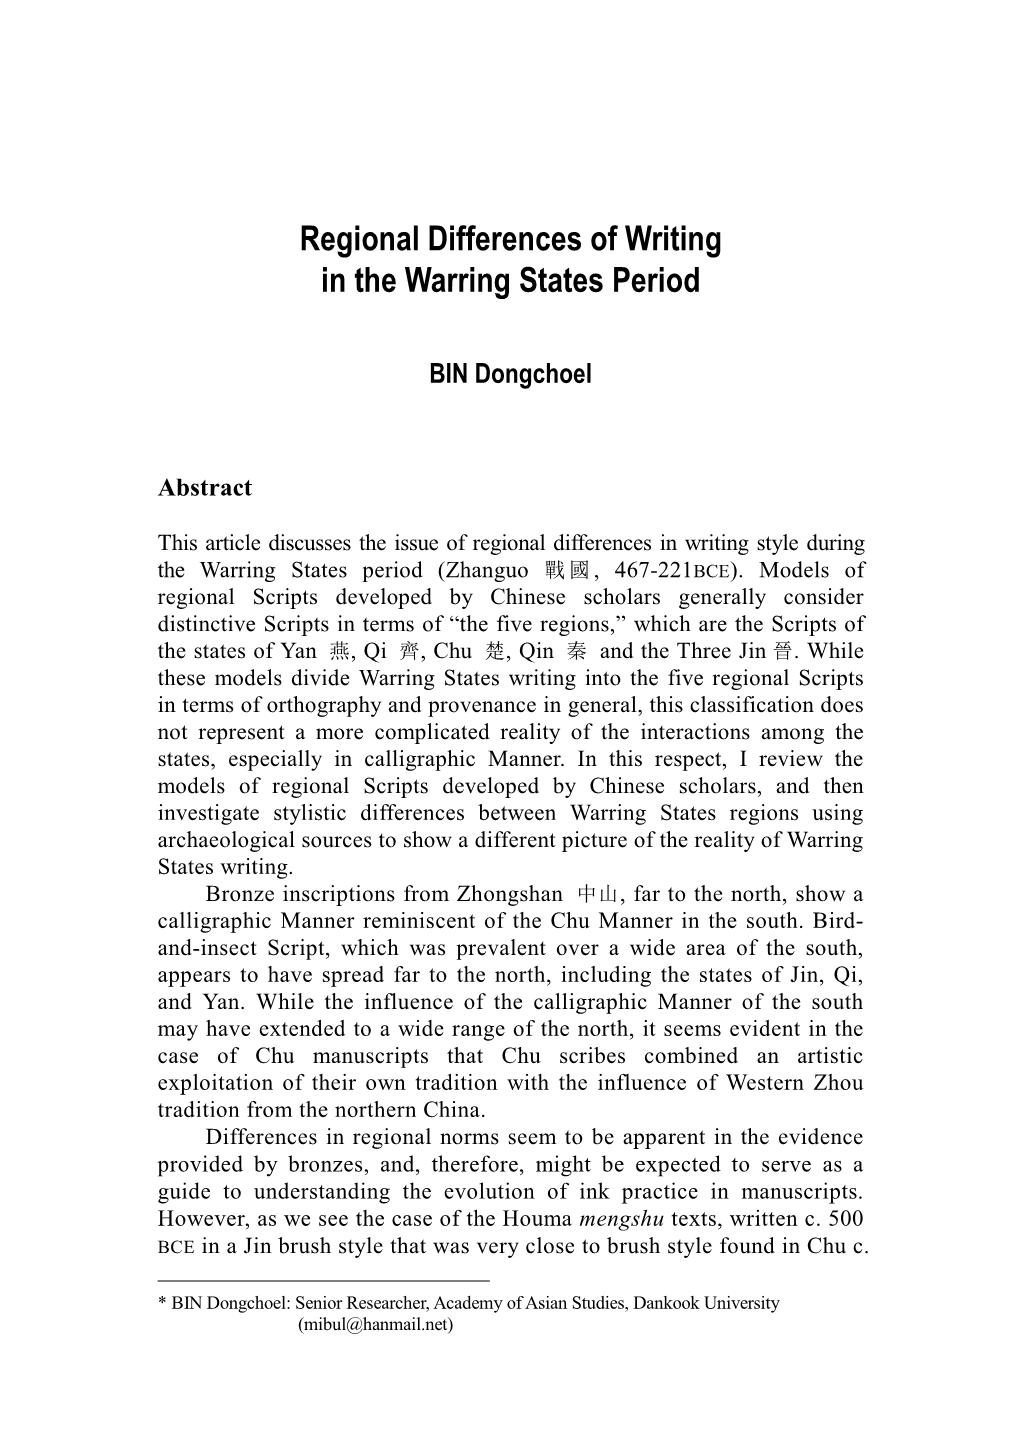 Regional Differences of Writing in the Warring States Period *